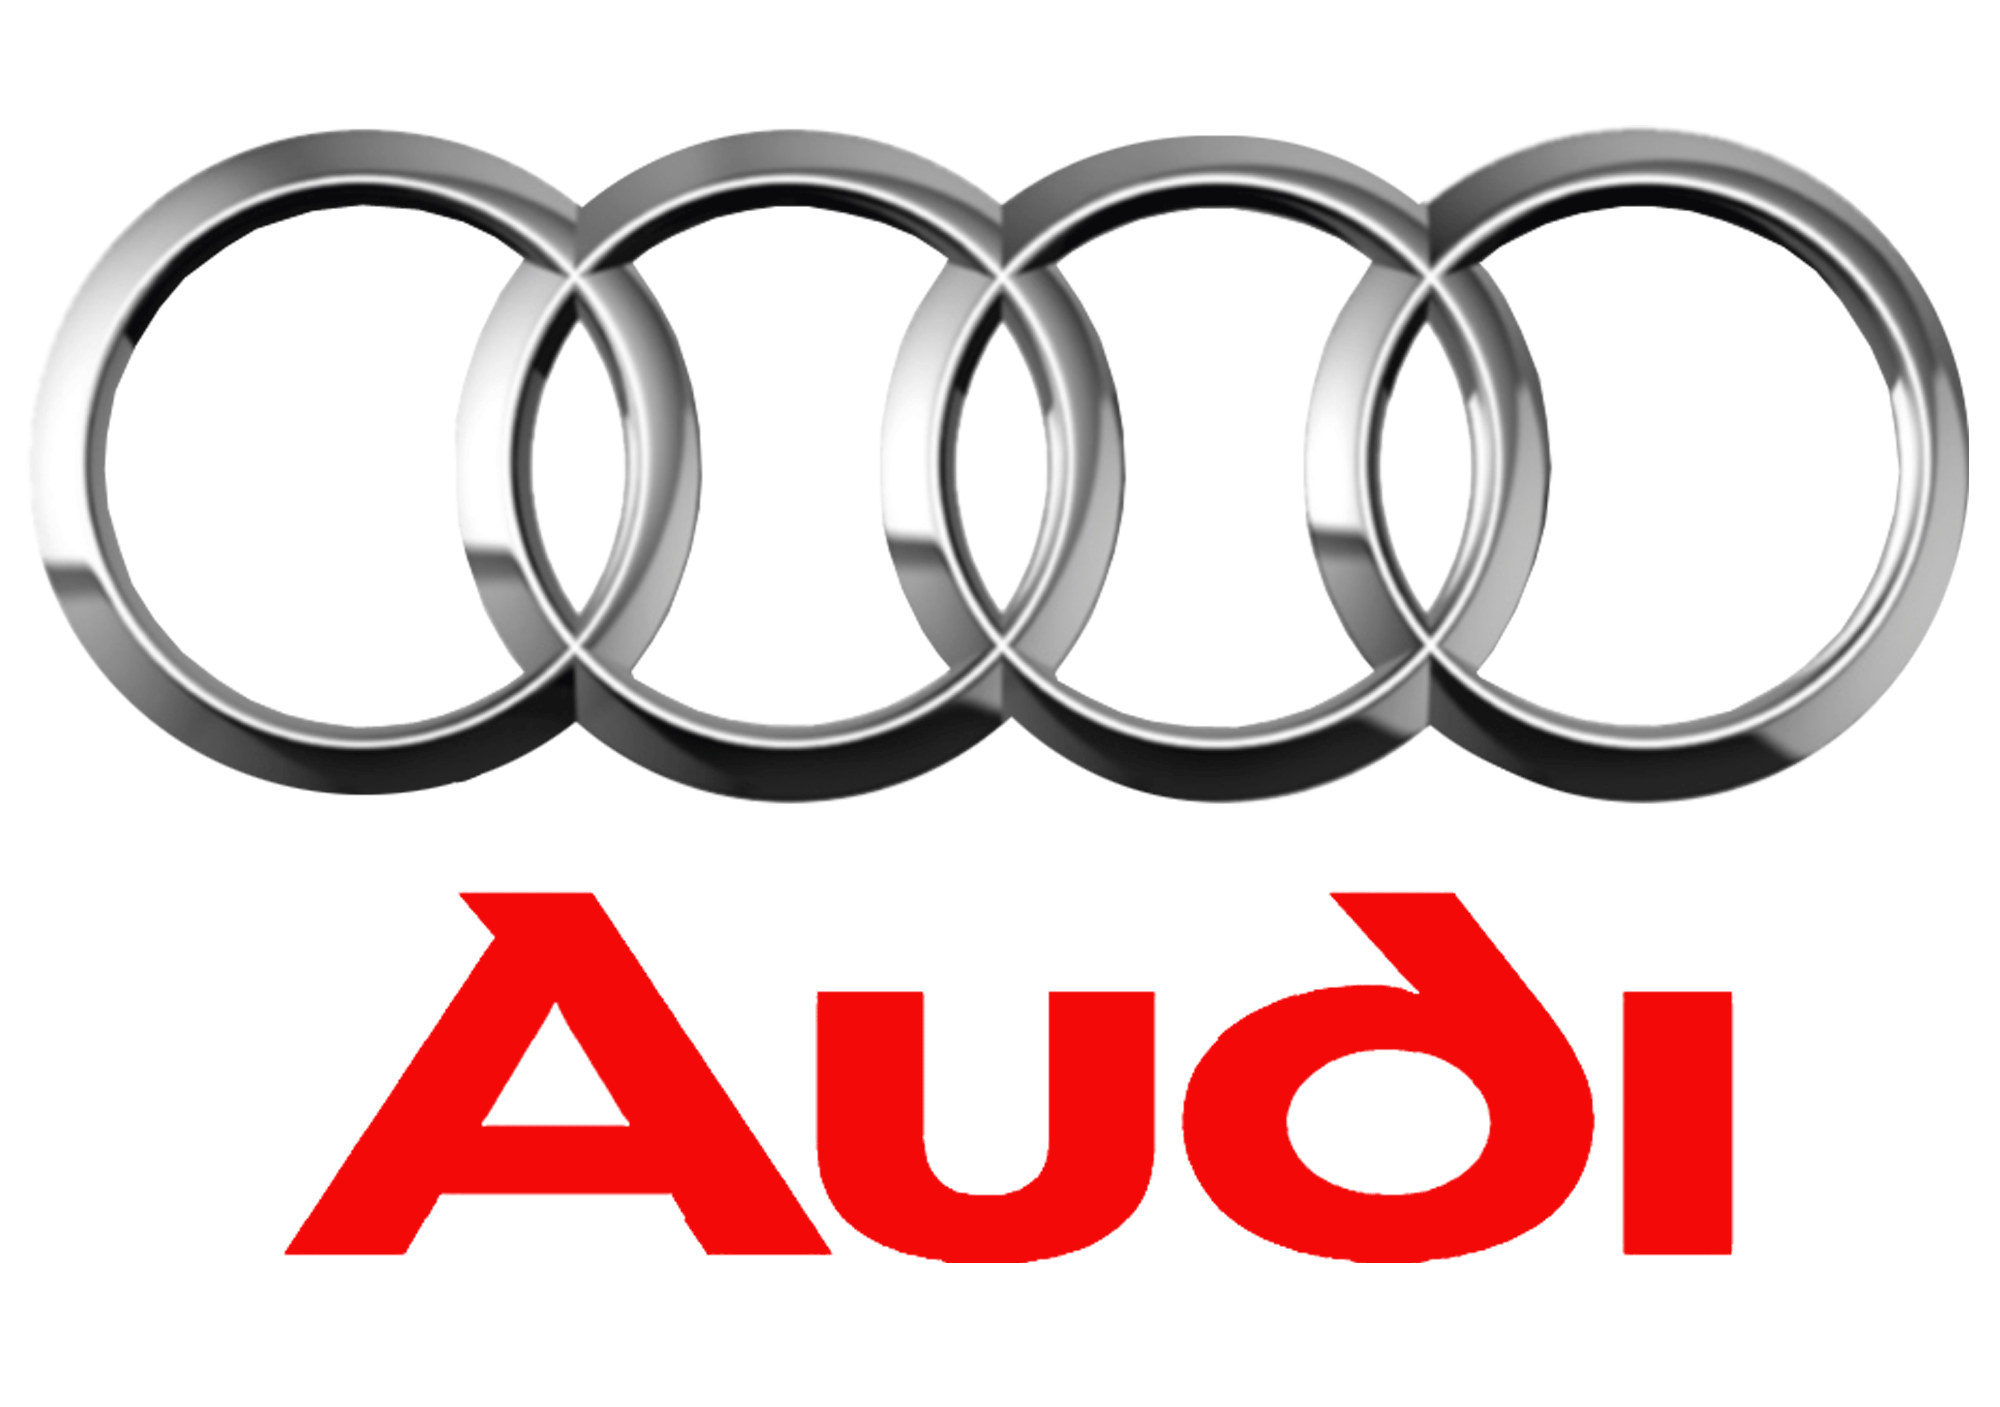 audi car logo with red text png #724